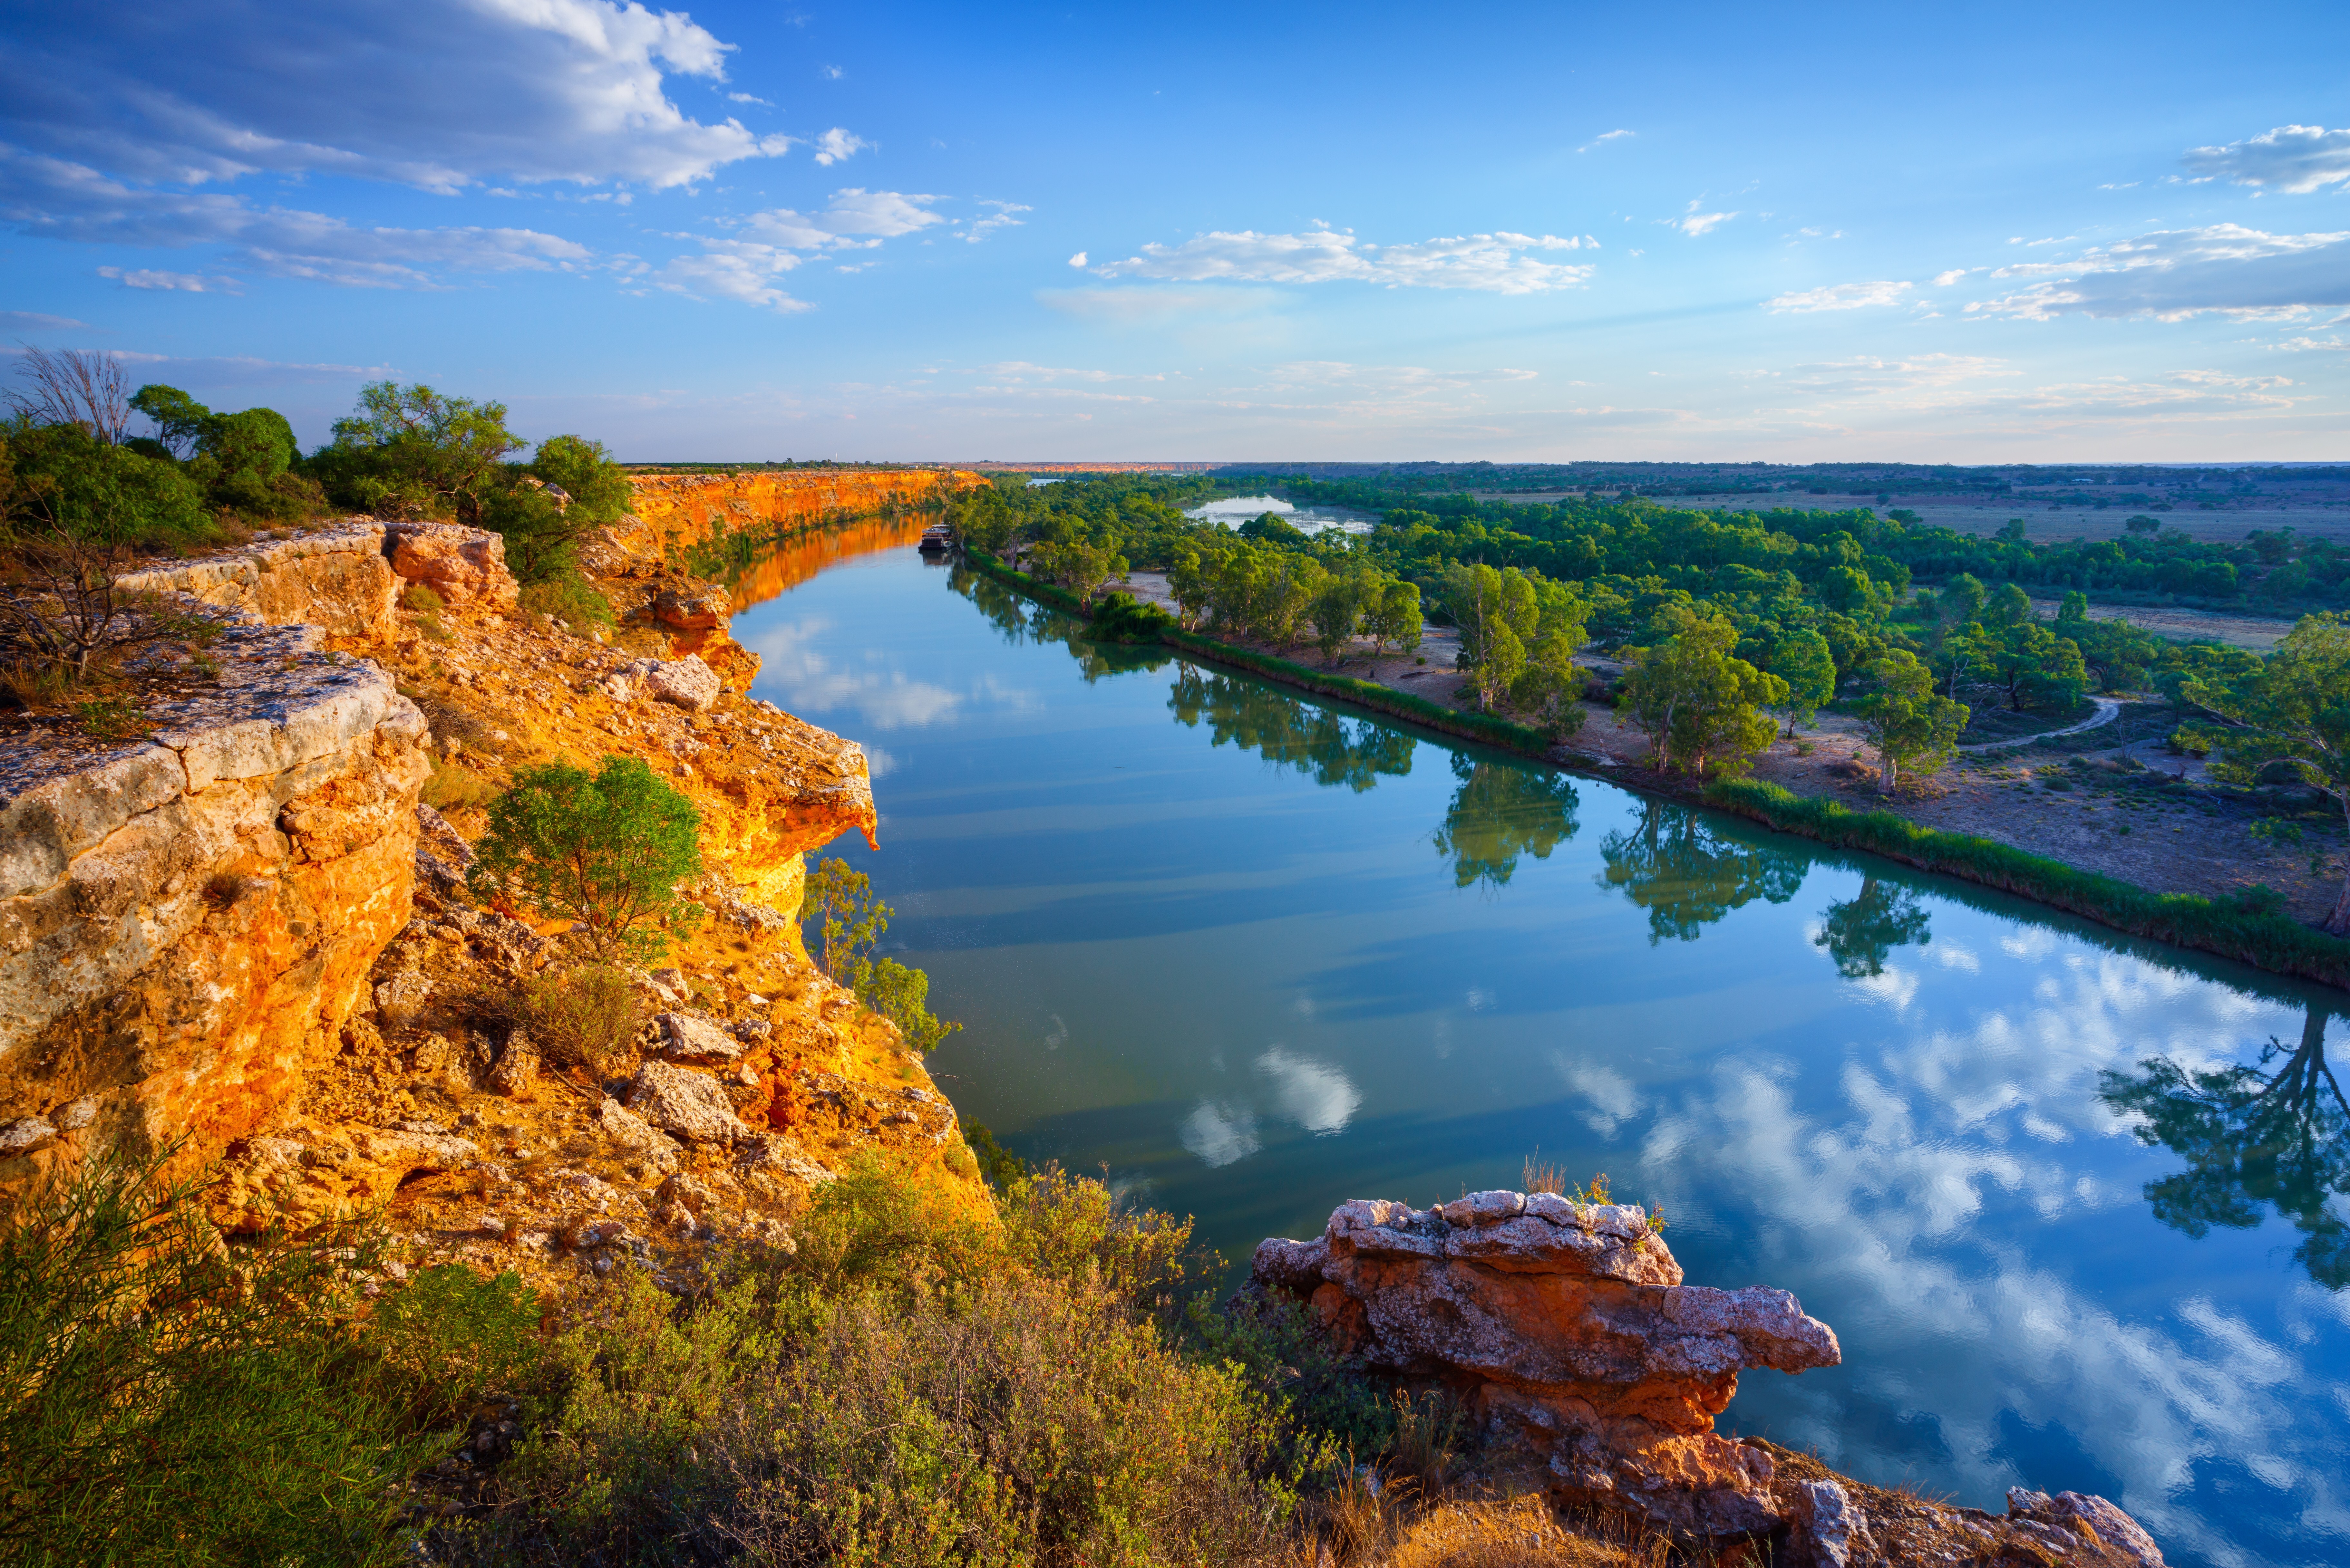 The Murray River is the longest in Australia. Photo: Shutterstock